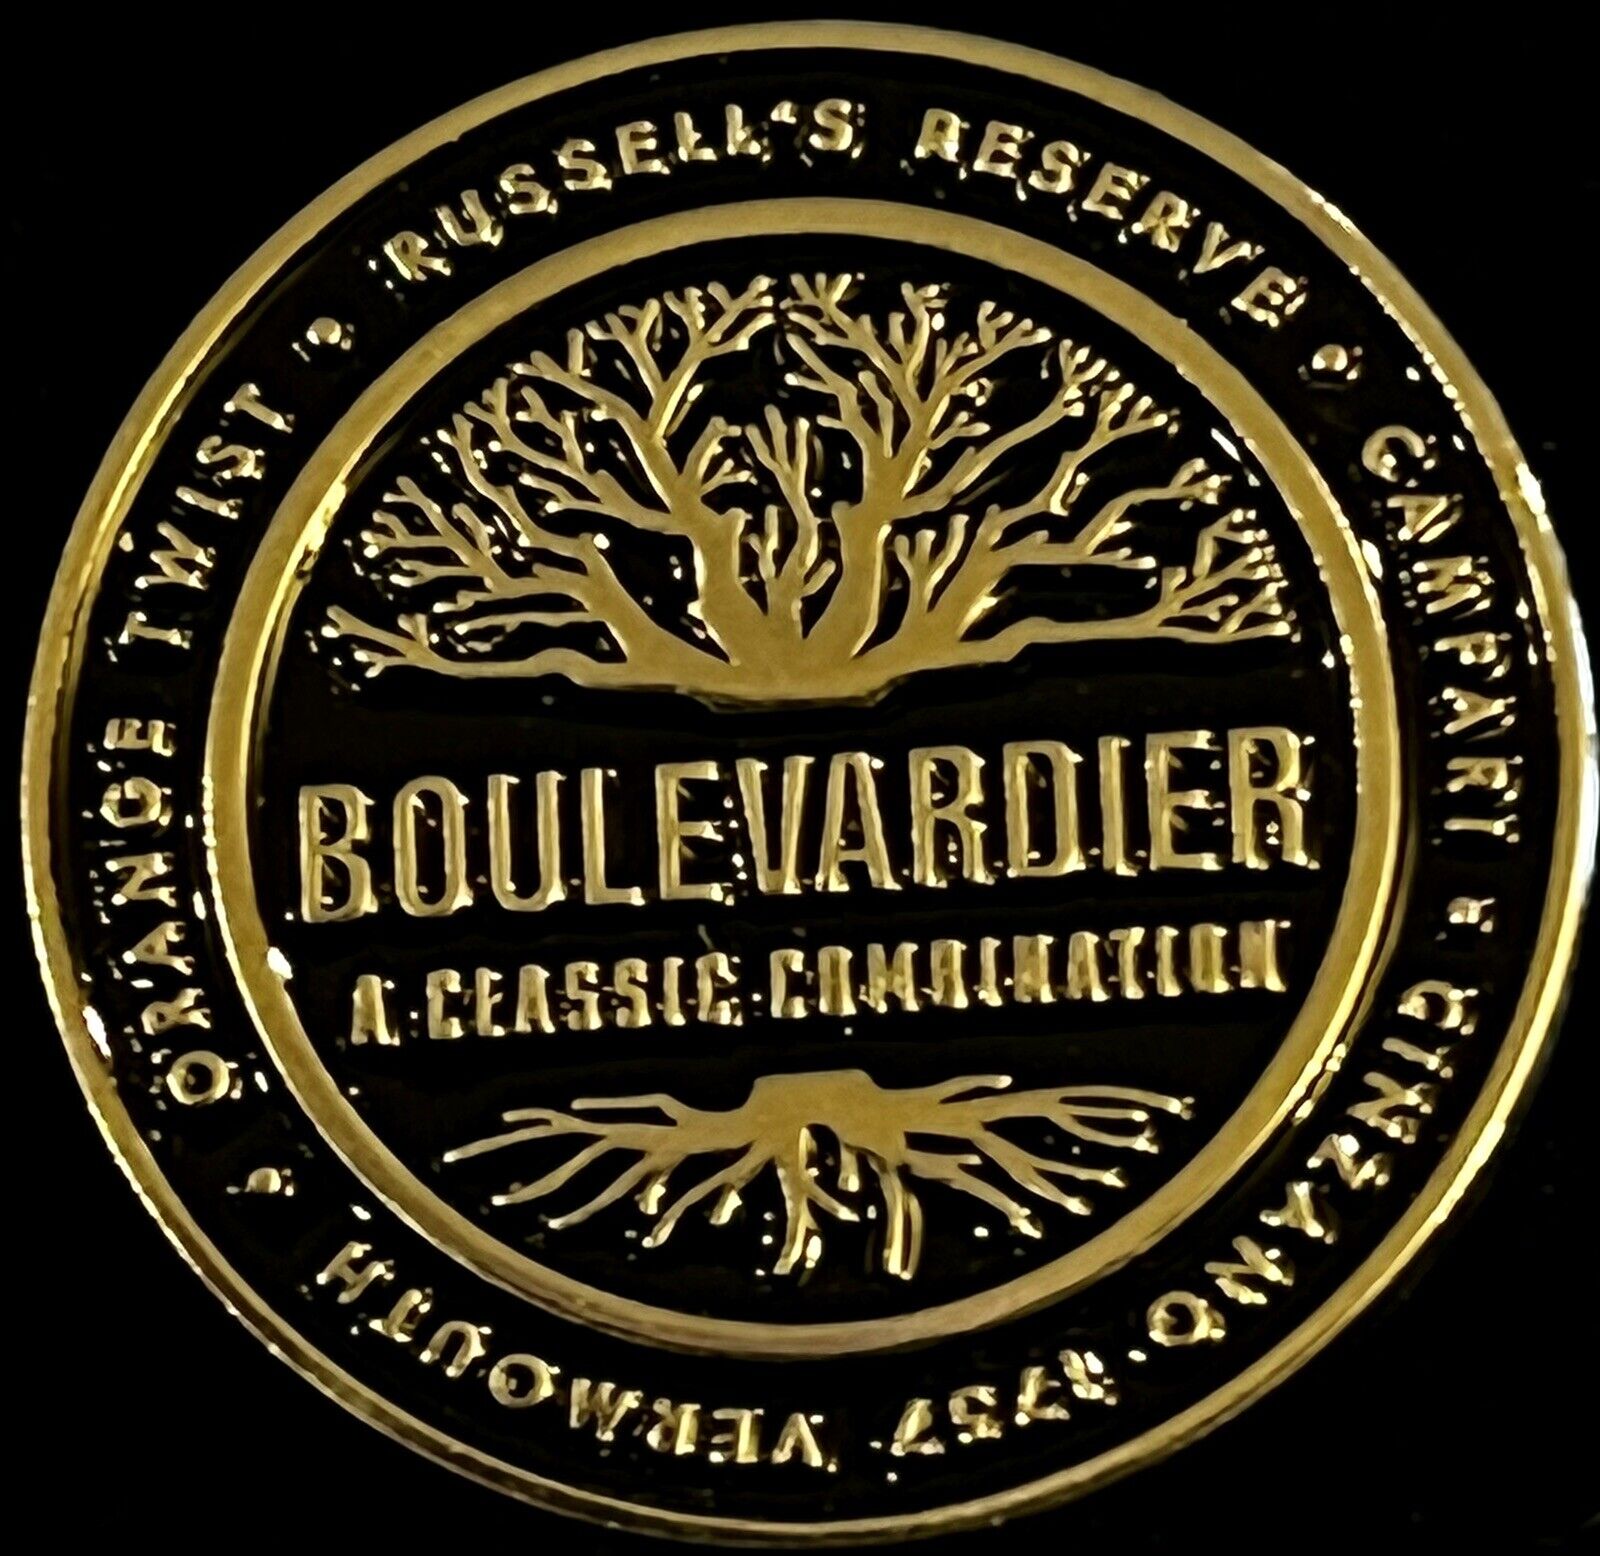 Boulevardier PIN Russells Reserve Liquor Bar Cocktail Collect Whiskey EUC